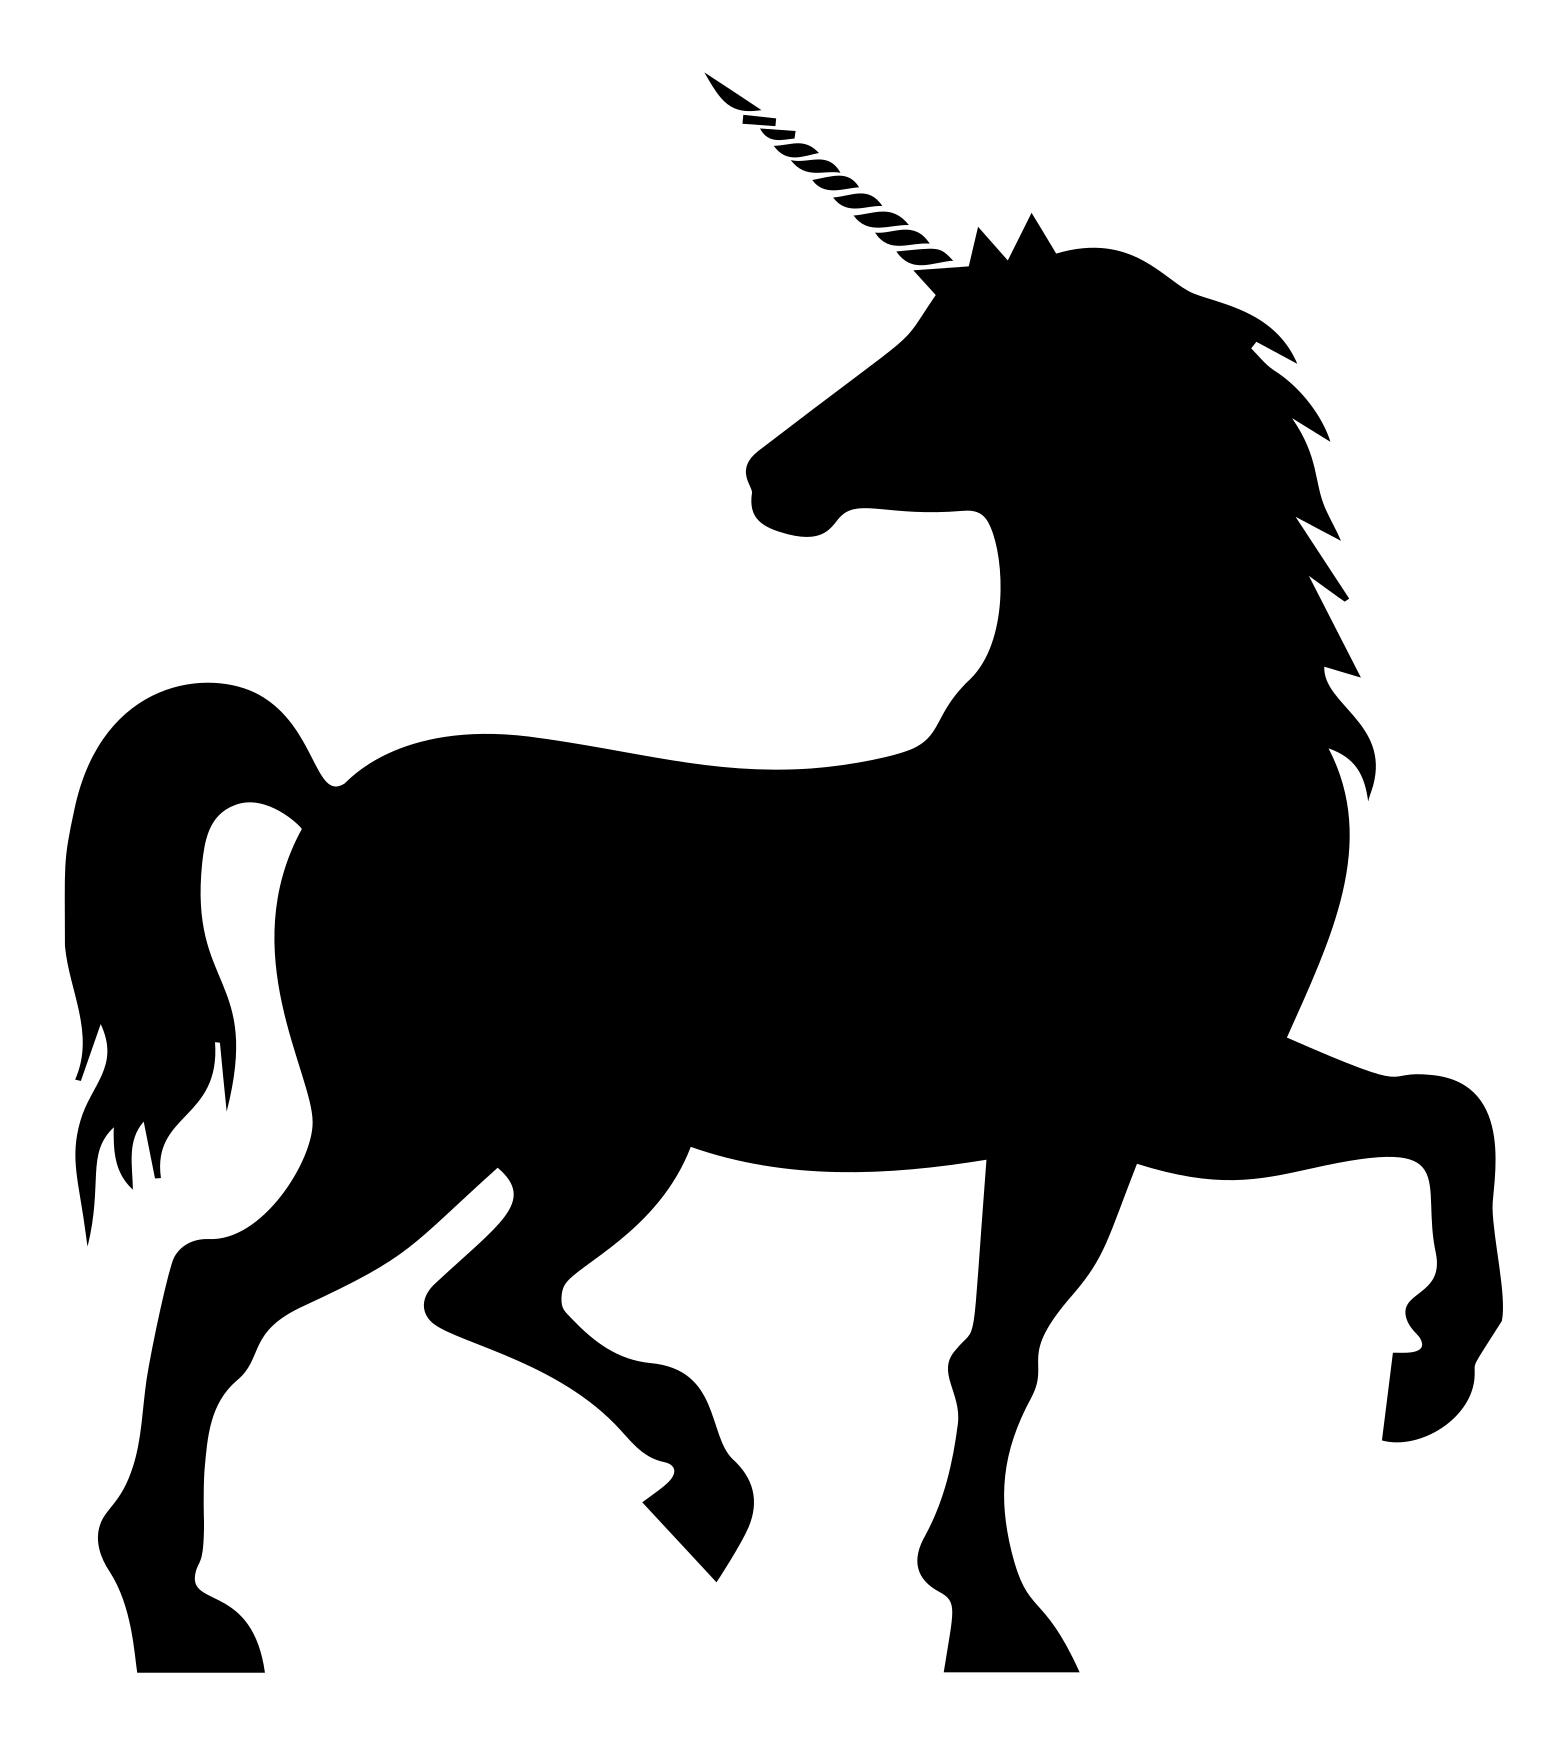 Unicorn Silhouette Clip Art at GetDrawings Free download